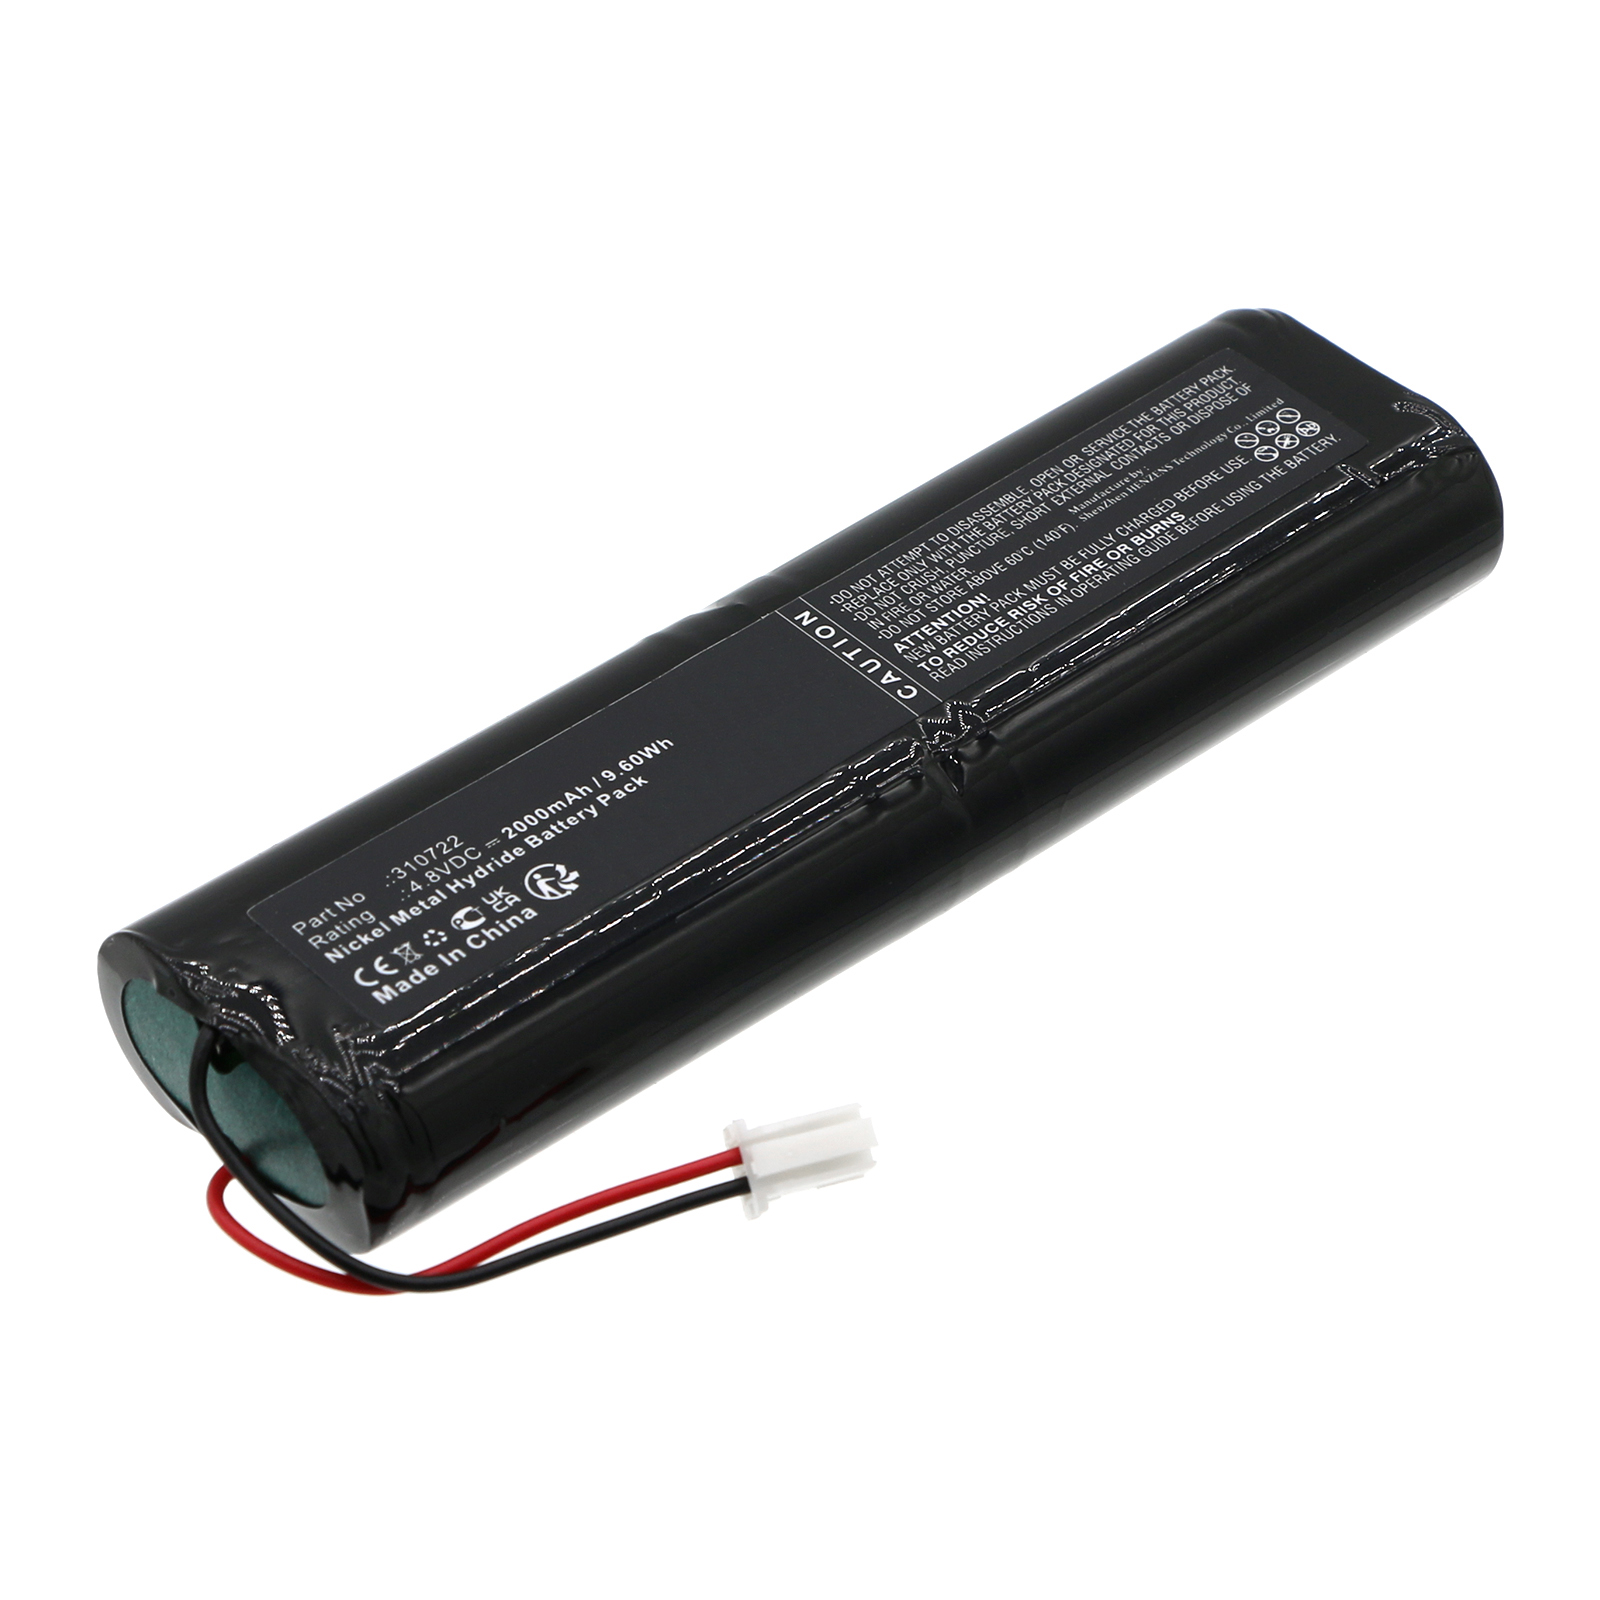 Synergy Digital Equipment Battery, Compatible with Bartec Benke 04Z14500-2201 Equipment Battery (Ni-MH, 4.8V, 2000mAh)